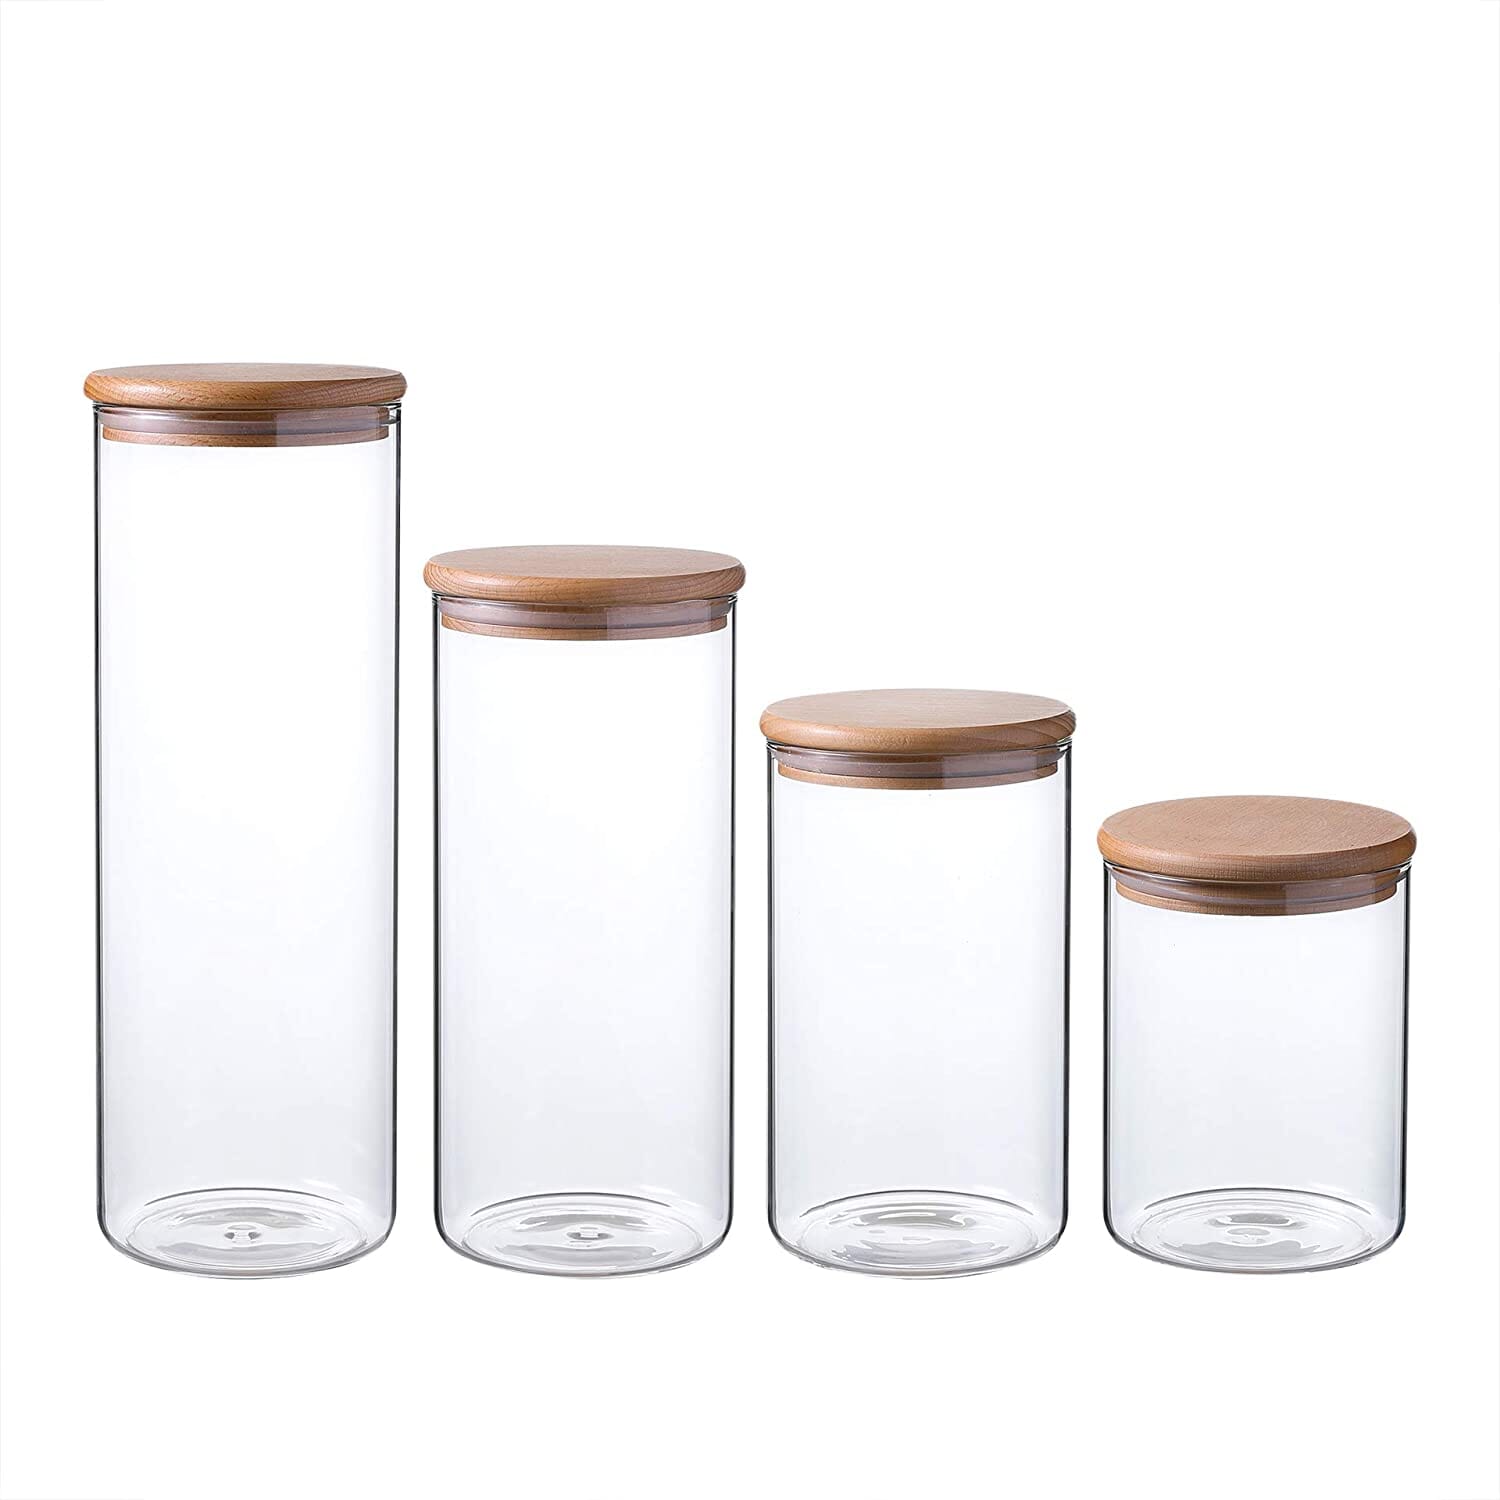 34 oz. Air Tight Frosted Glass Storage Jars